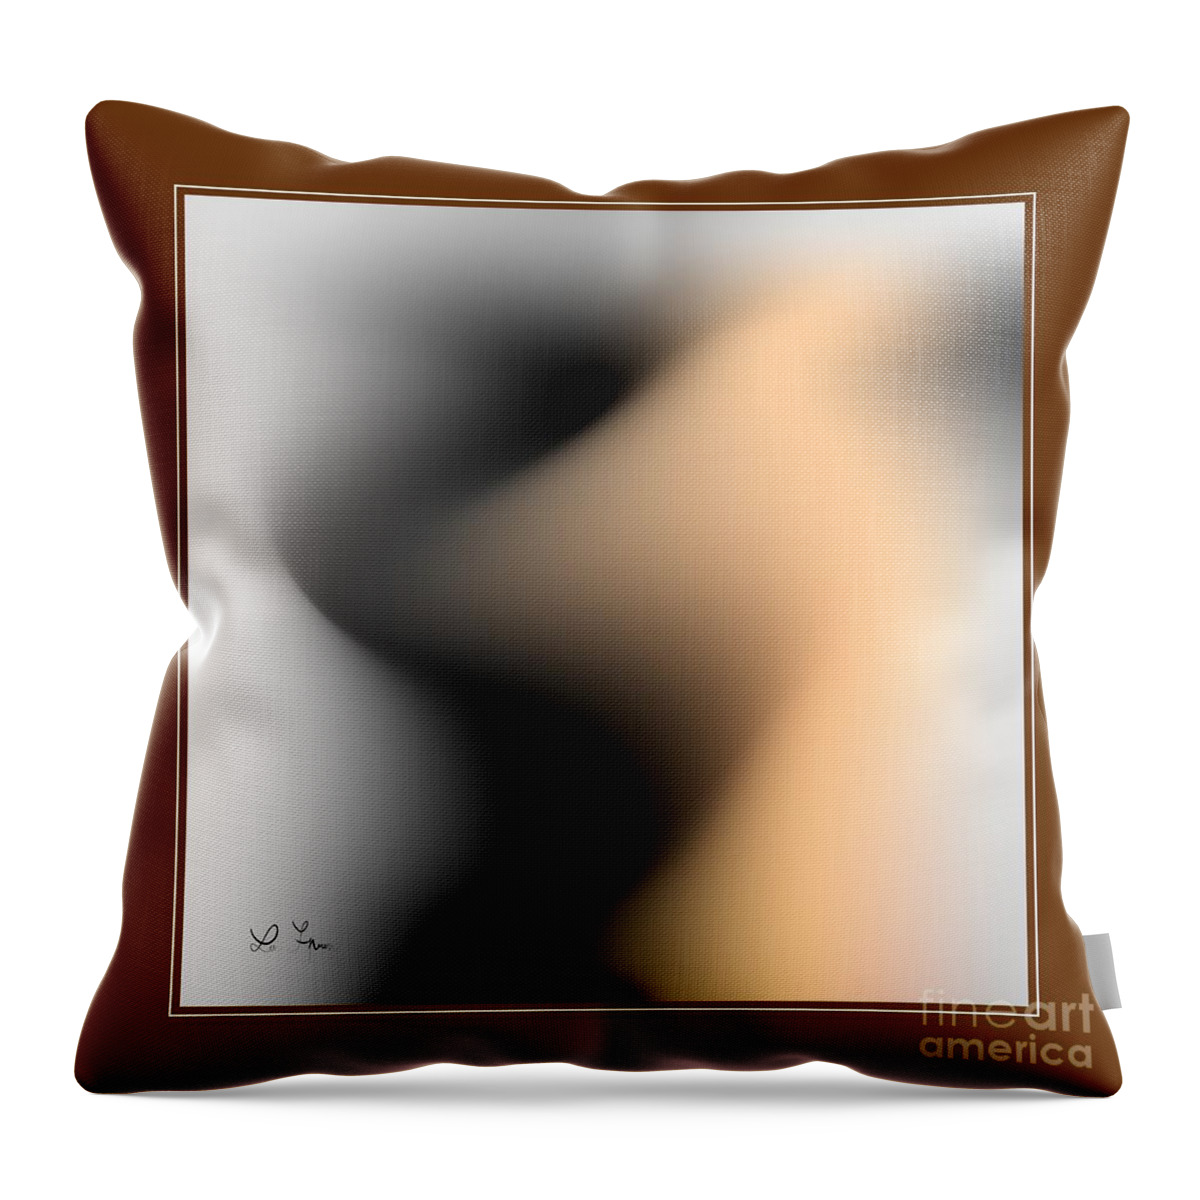 Silhouettes Throw Pillow featuring the digital art Silhouettes 3 by Leo Symon